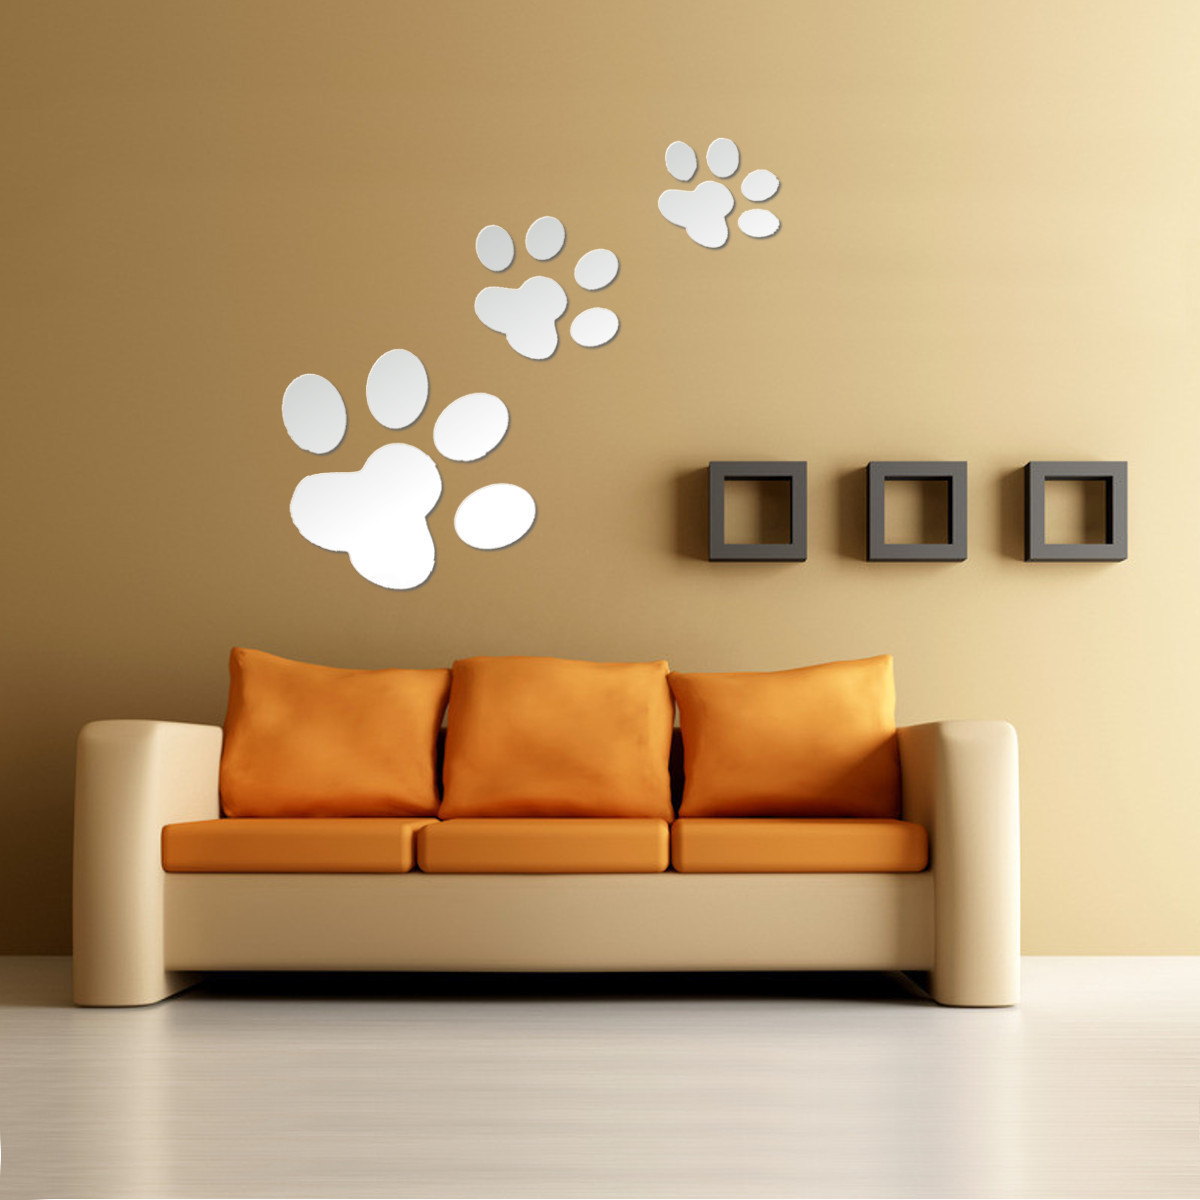 Living Room Wall Art Stickers
 Removable DIY 3D Mirror Surface Wall Stickers Mural Art